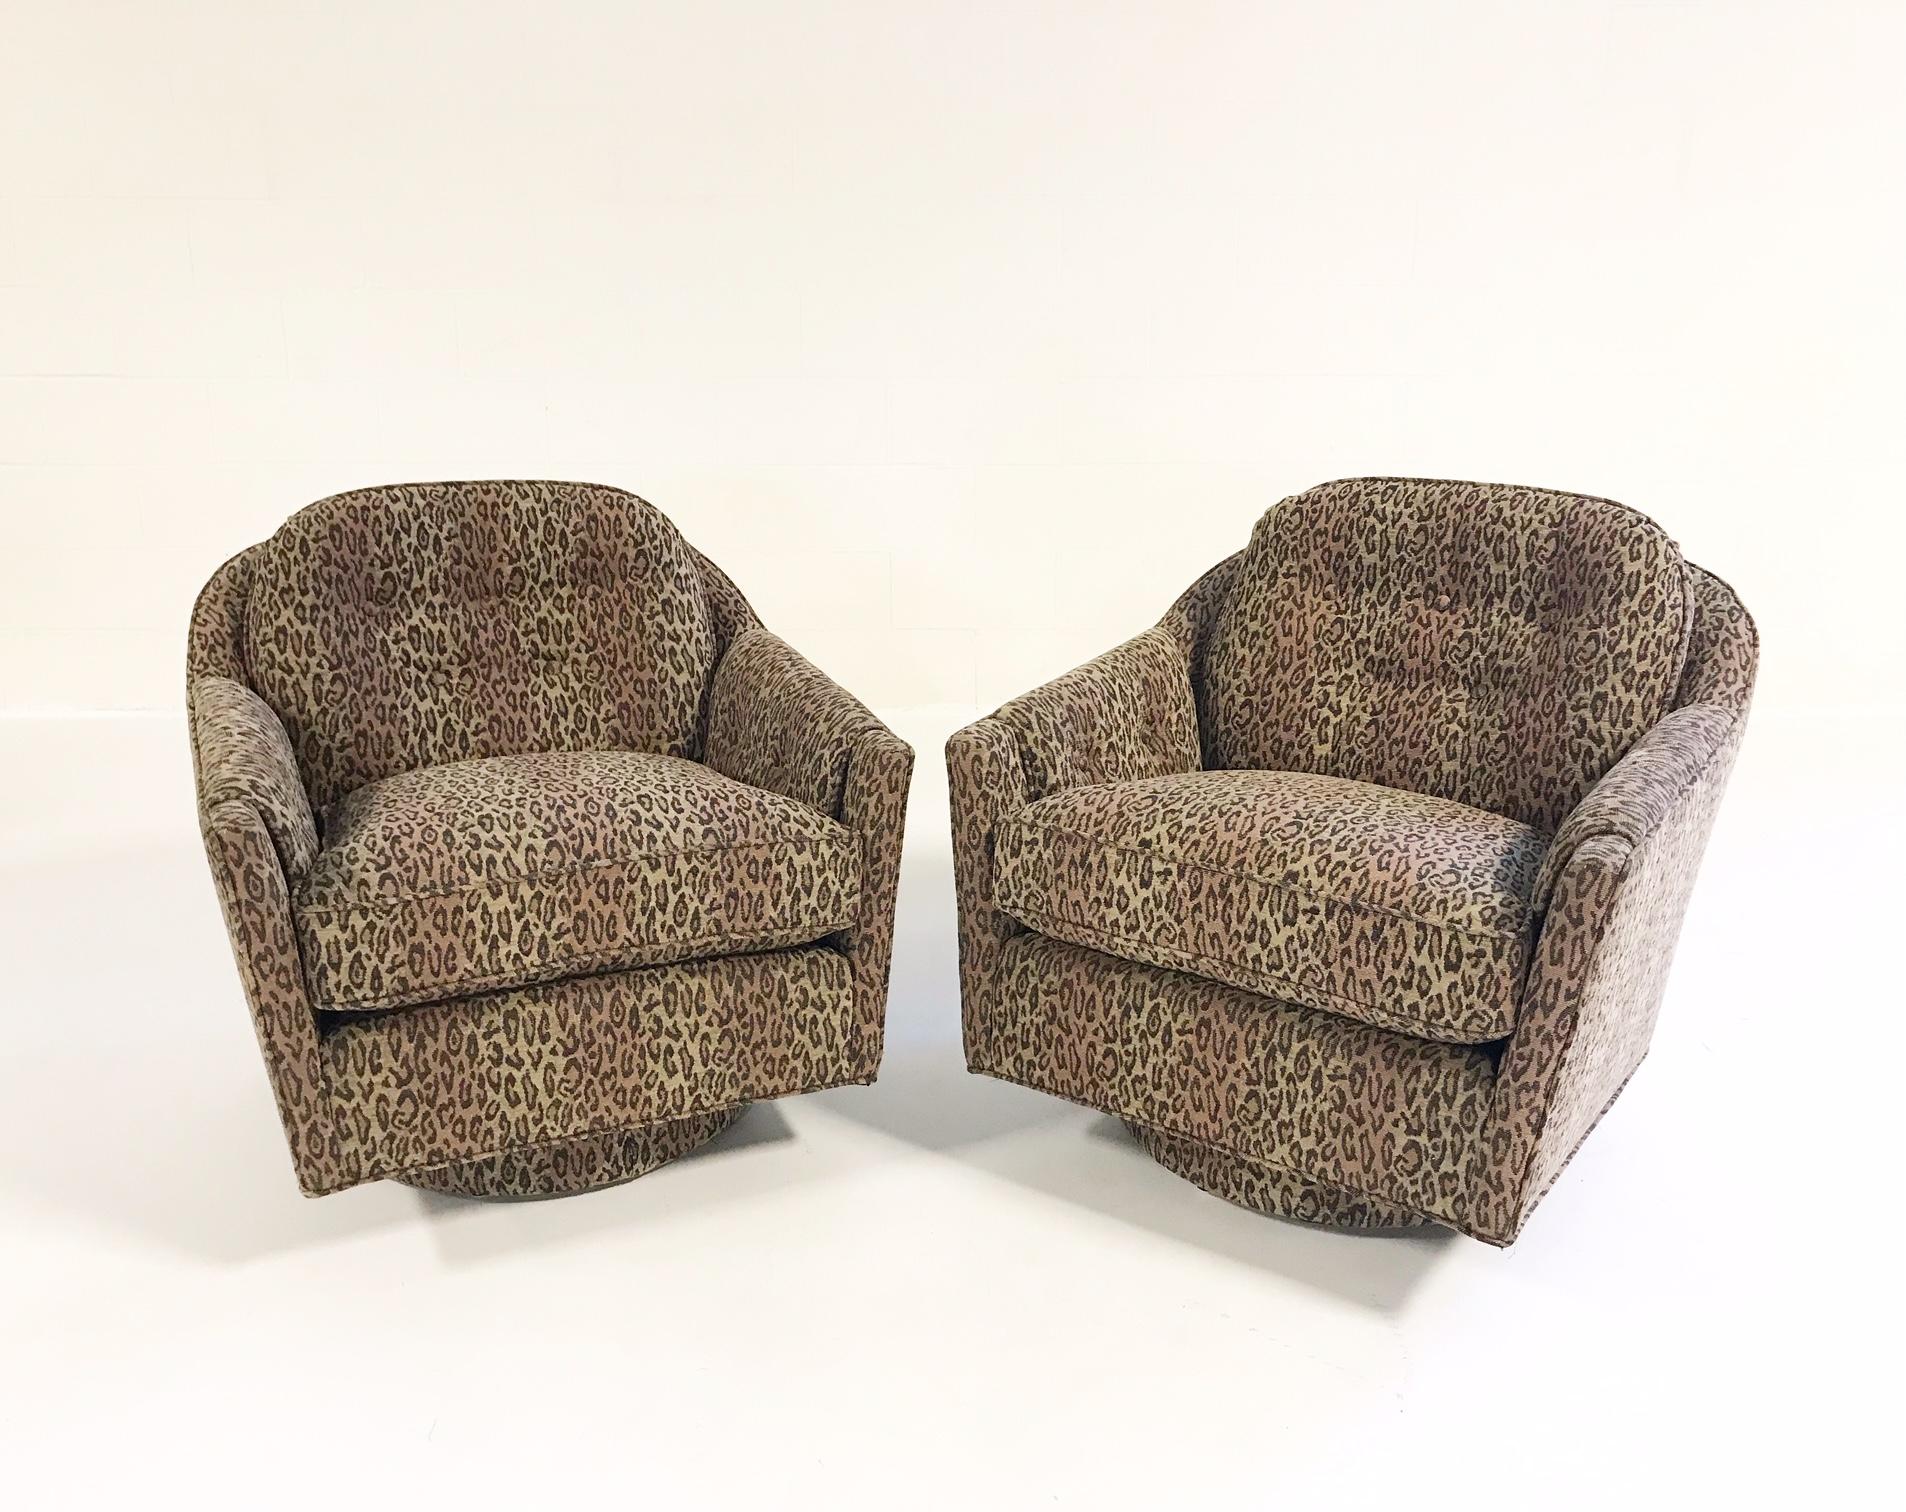 Mid-Century Modern Swivel Lounge Chairs in the style of Milo Baughman, in Kravet Leopard Print For Sale